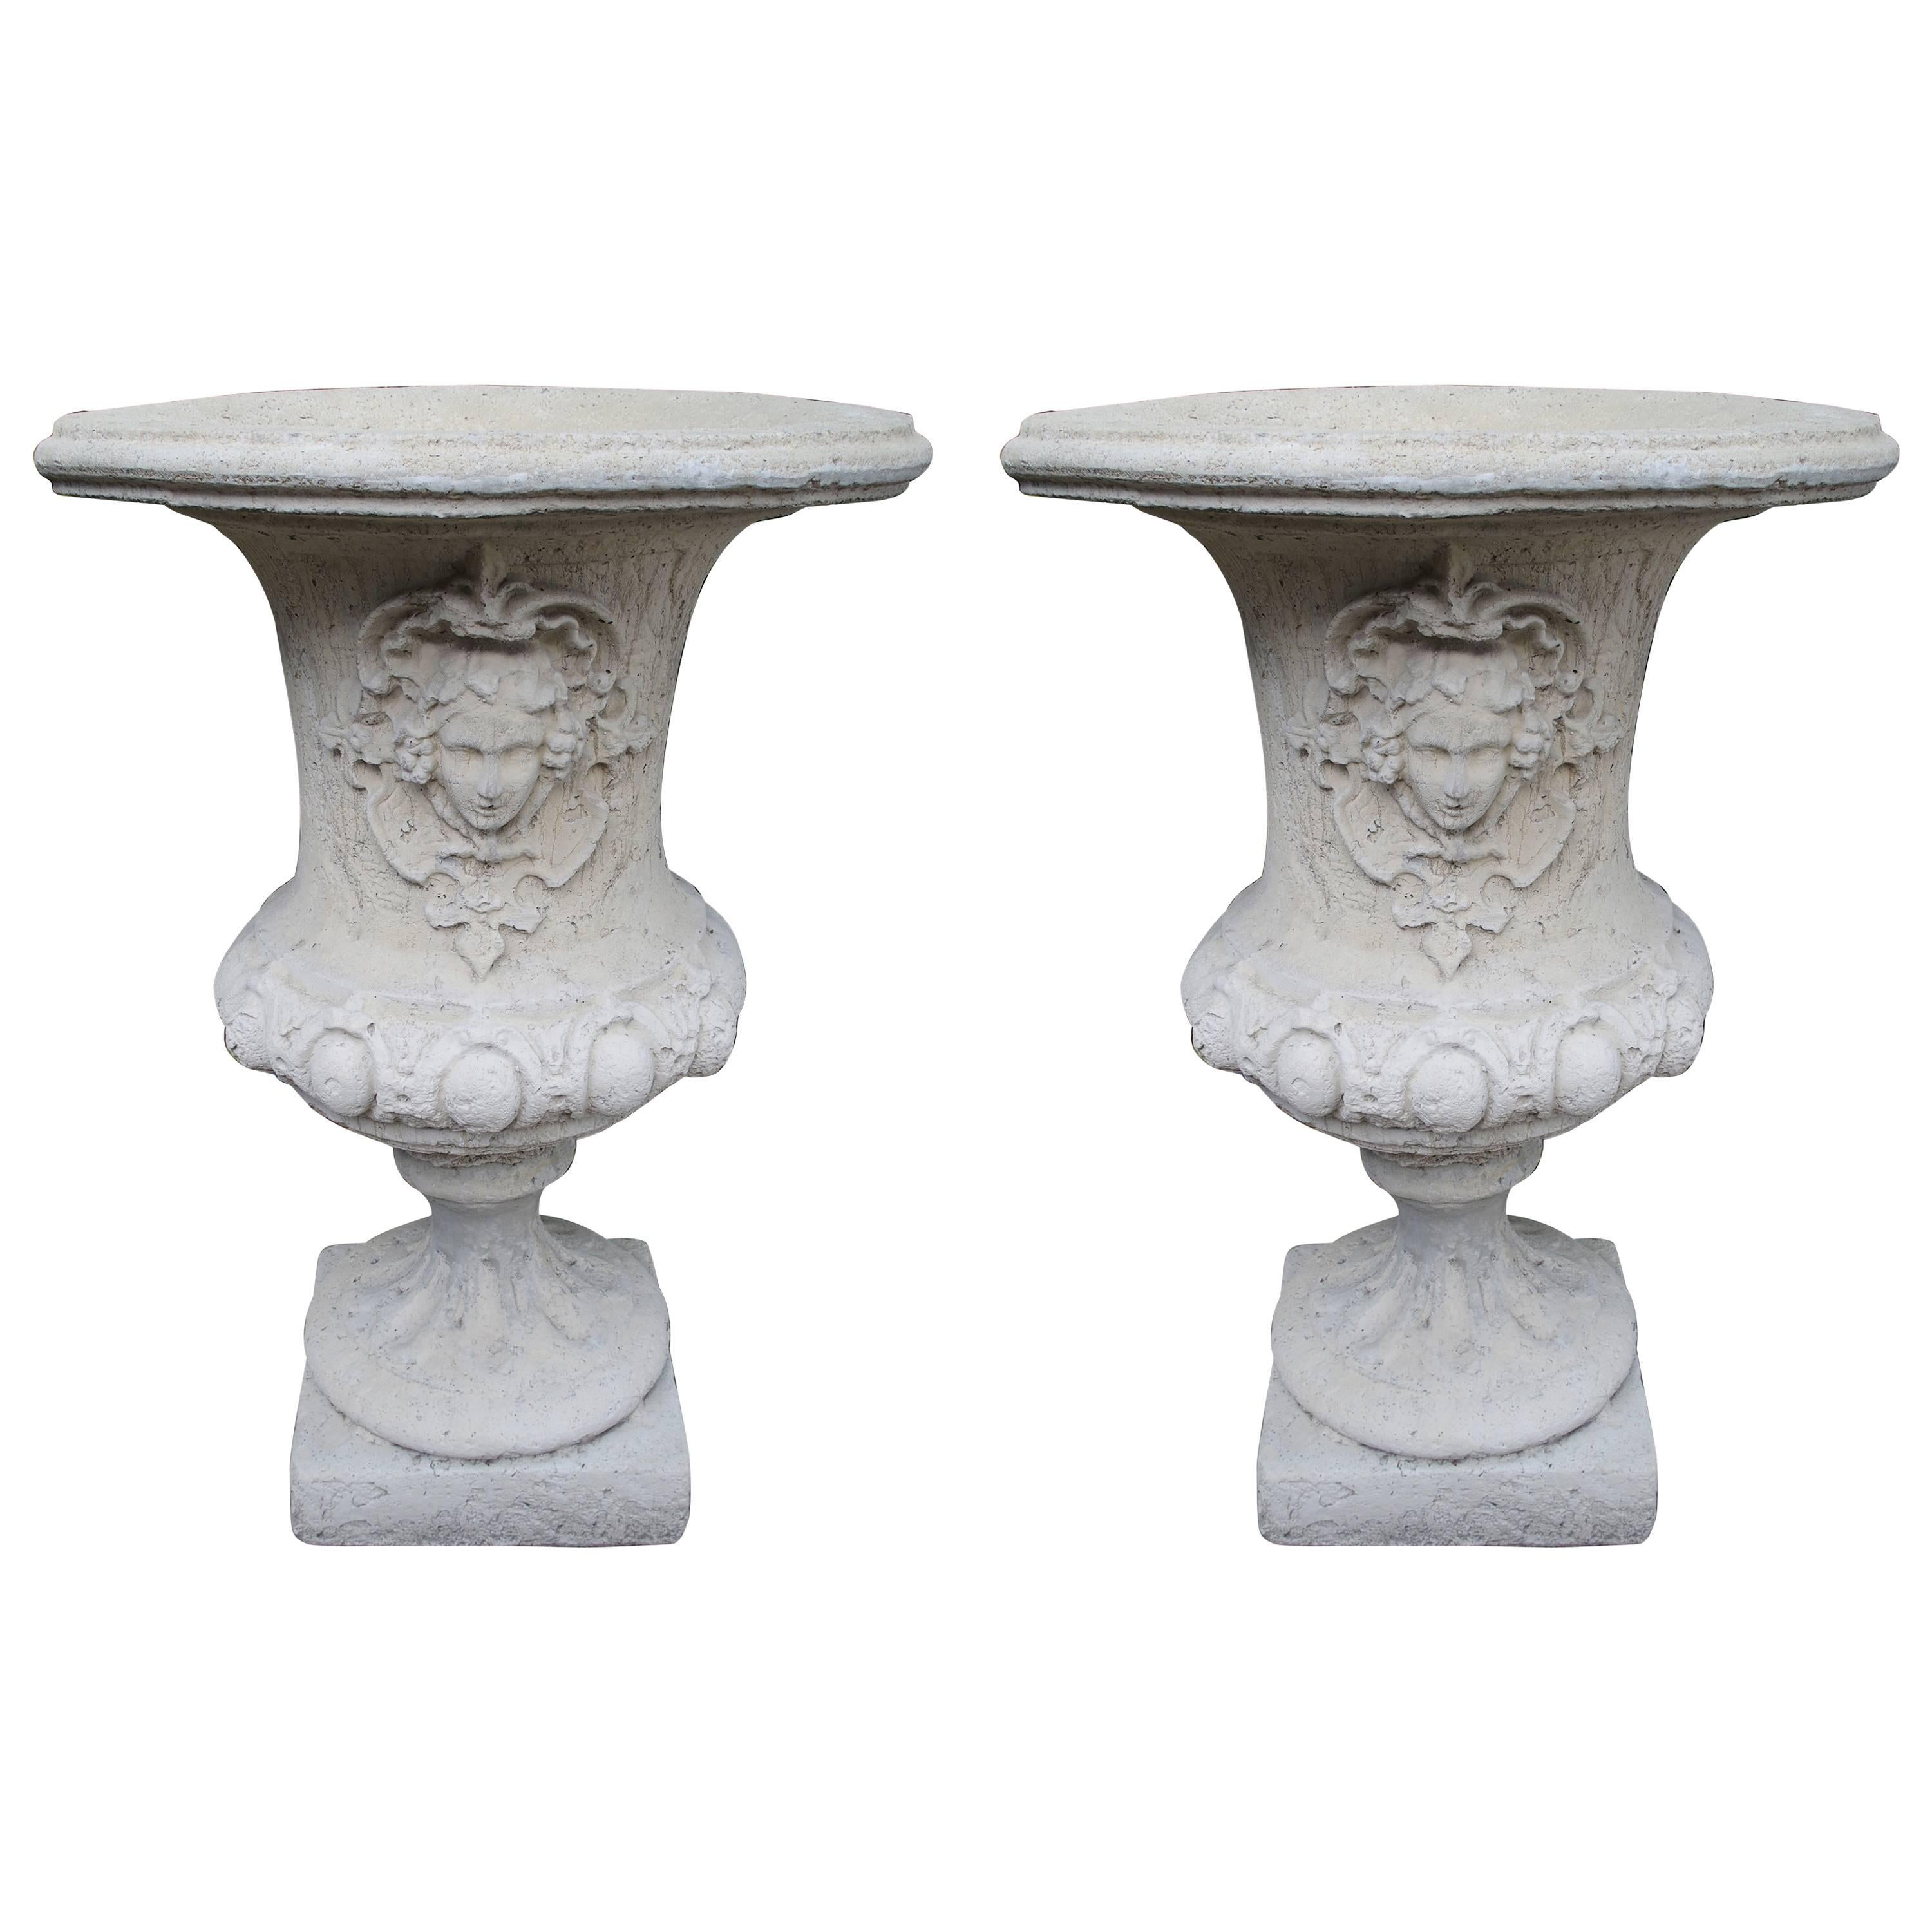 Pair of Large Louis XIV Style Urns in Cream Sandstone Finish